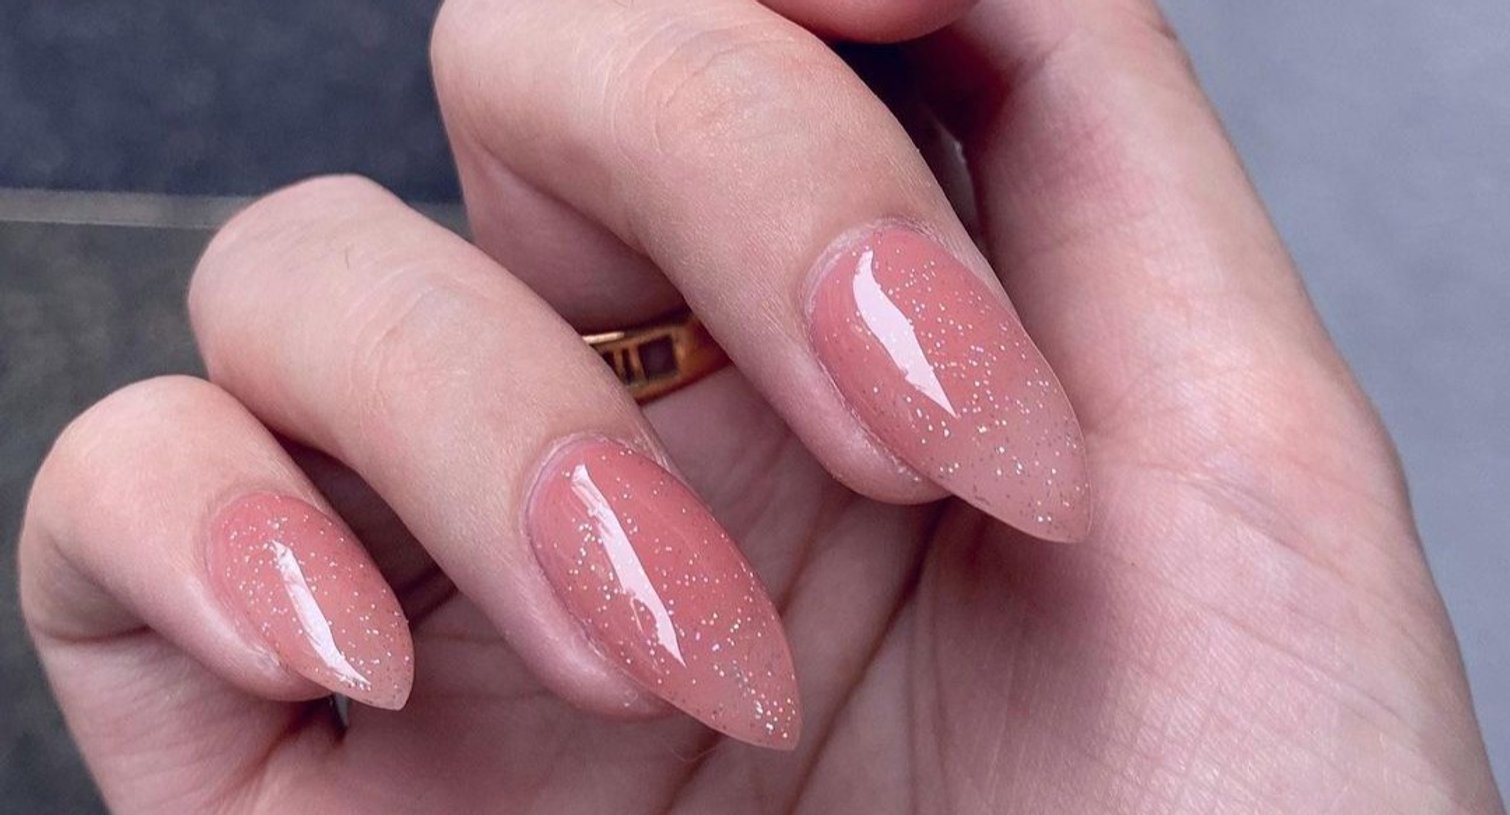 Nail Connection - Baby Pink Ombré nails